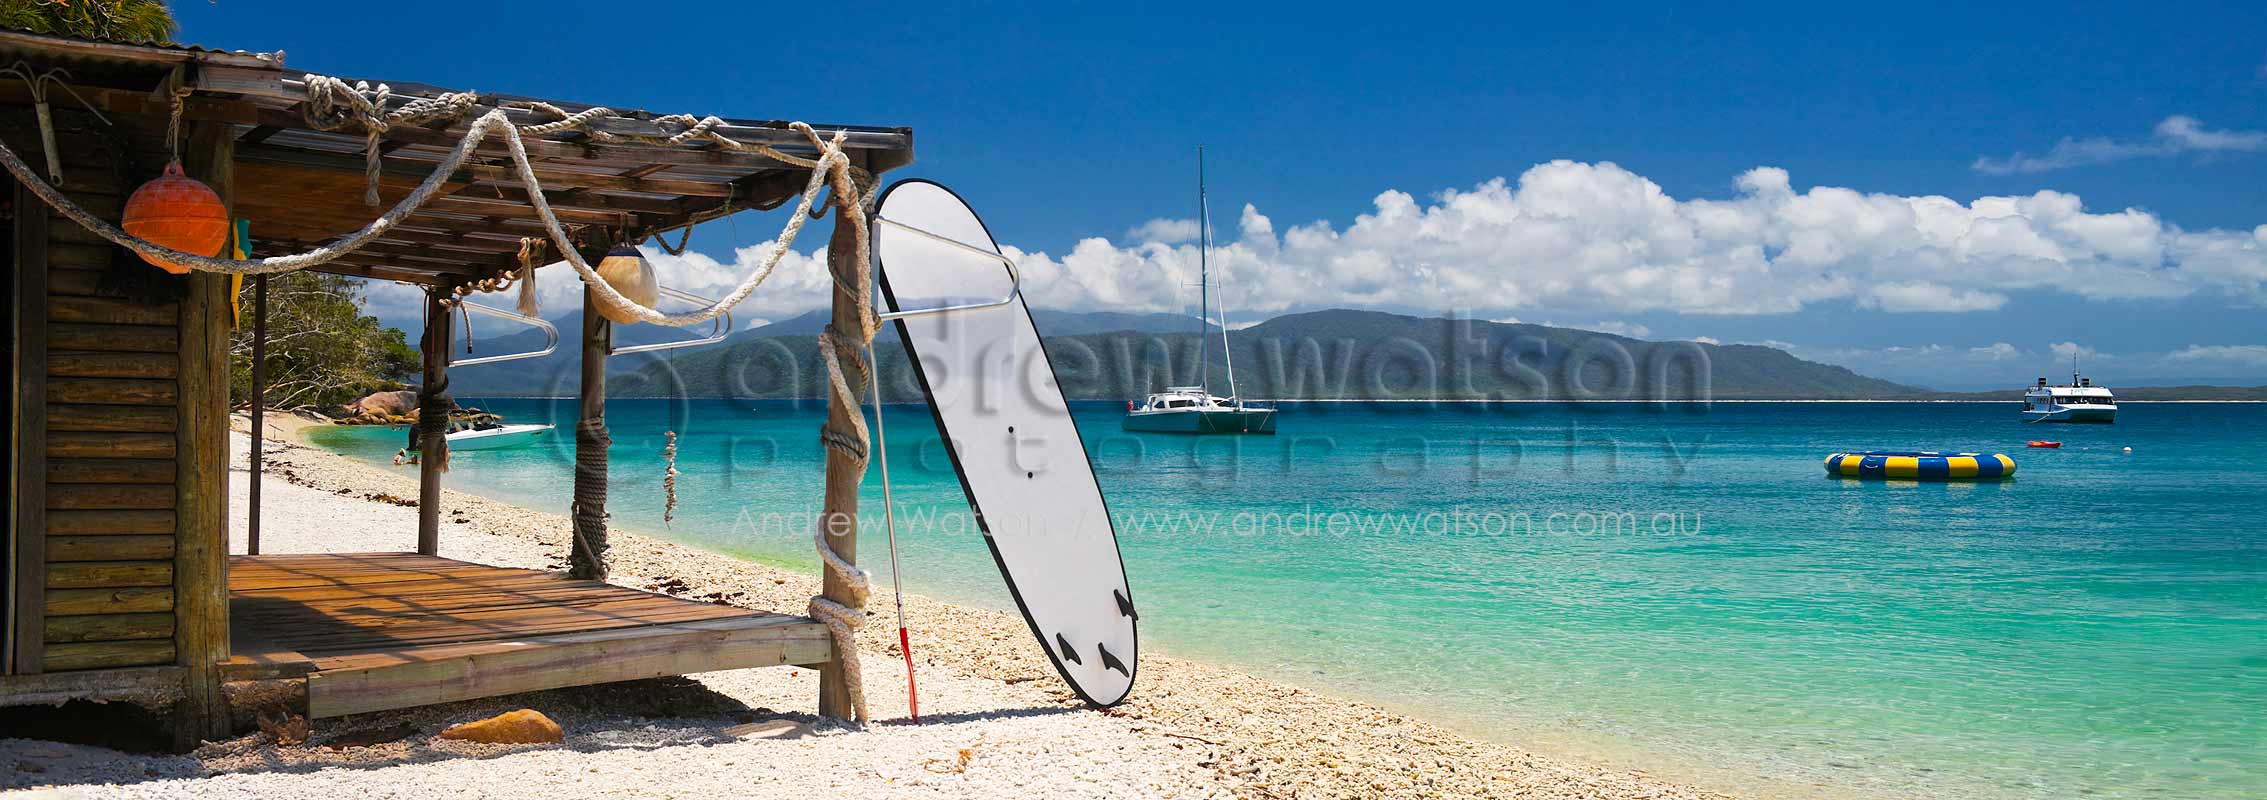 Boat shed at Welcome BayFitzroy Island, Cairns, North QueenslandImage available for licensing or as a fine-art print... please enquire